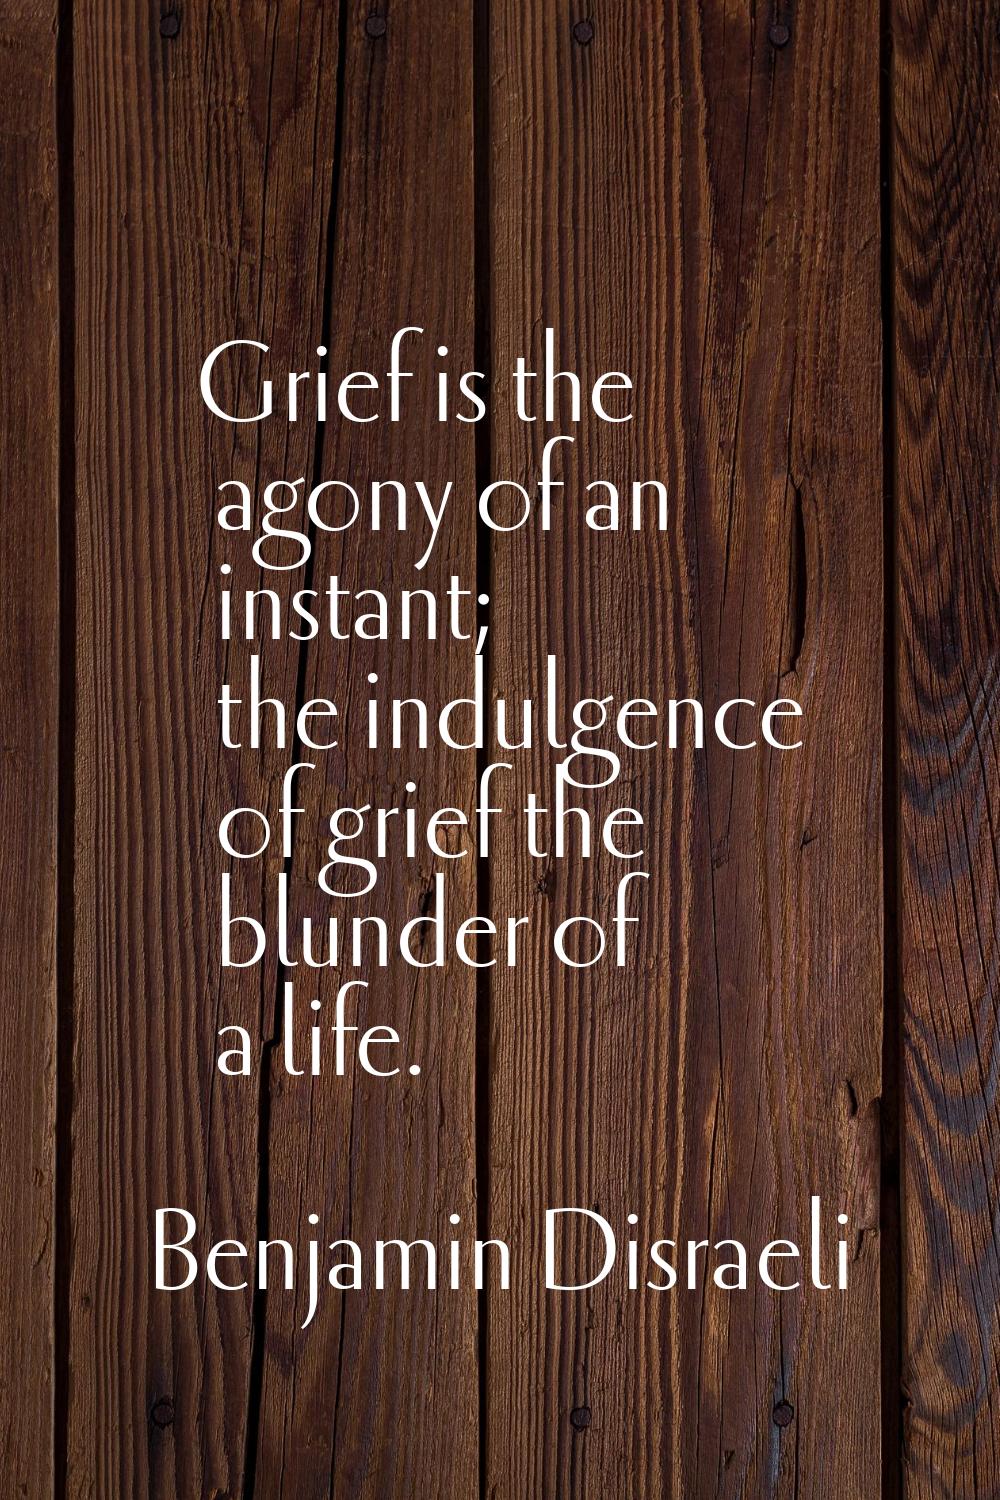 Grief is the agony of an instant; the indulgence of grief the blunder of a life.